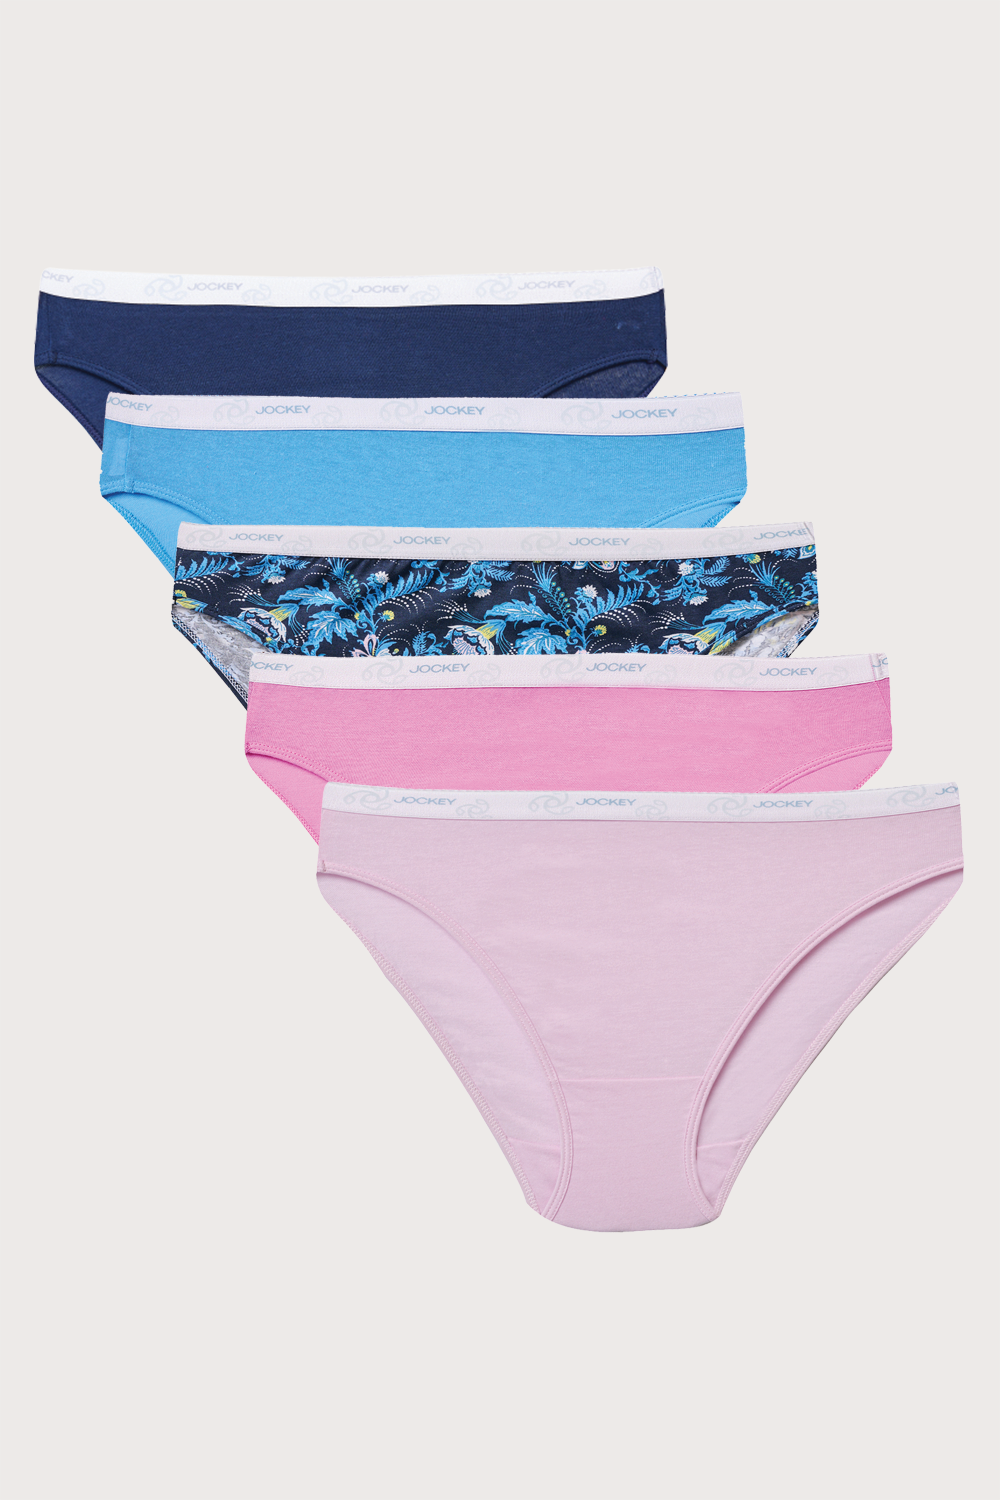 5-pack French Cut Panties (3103416)